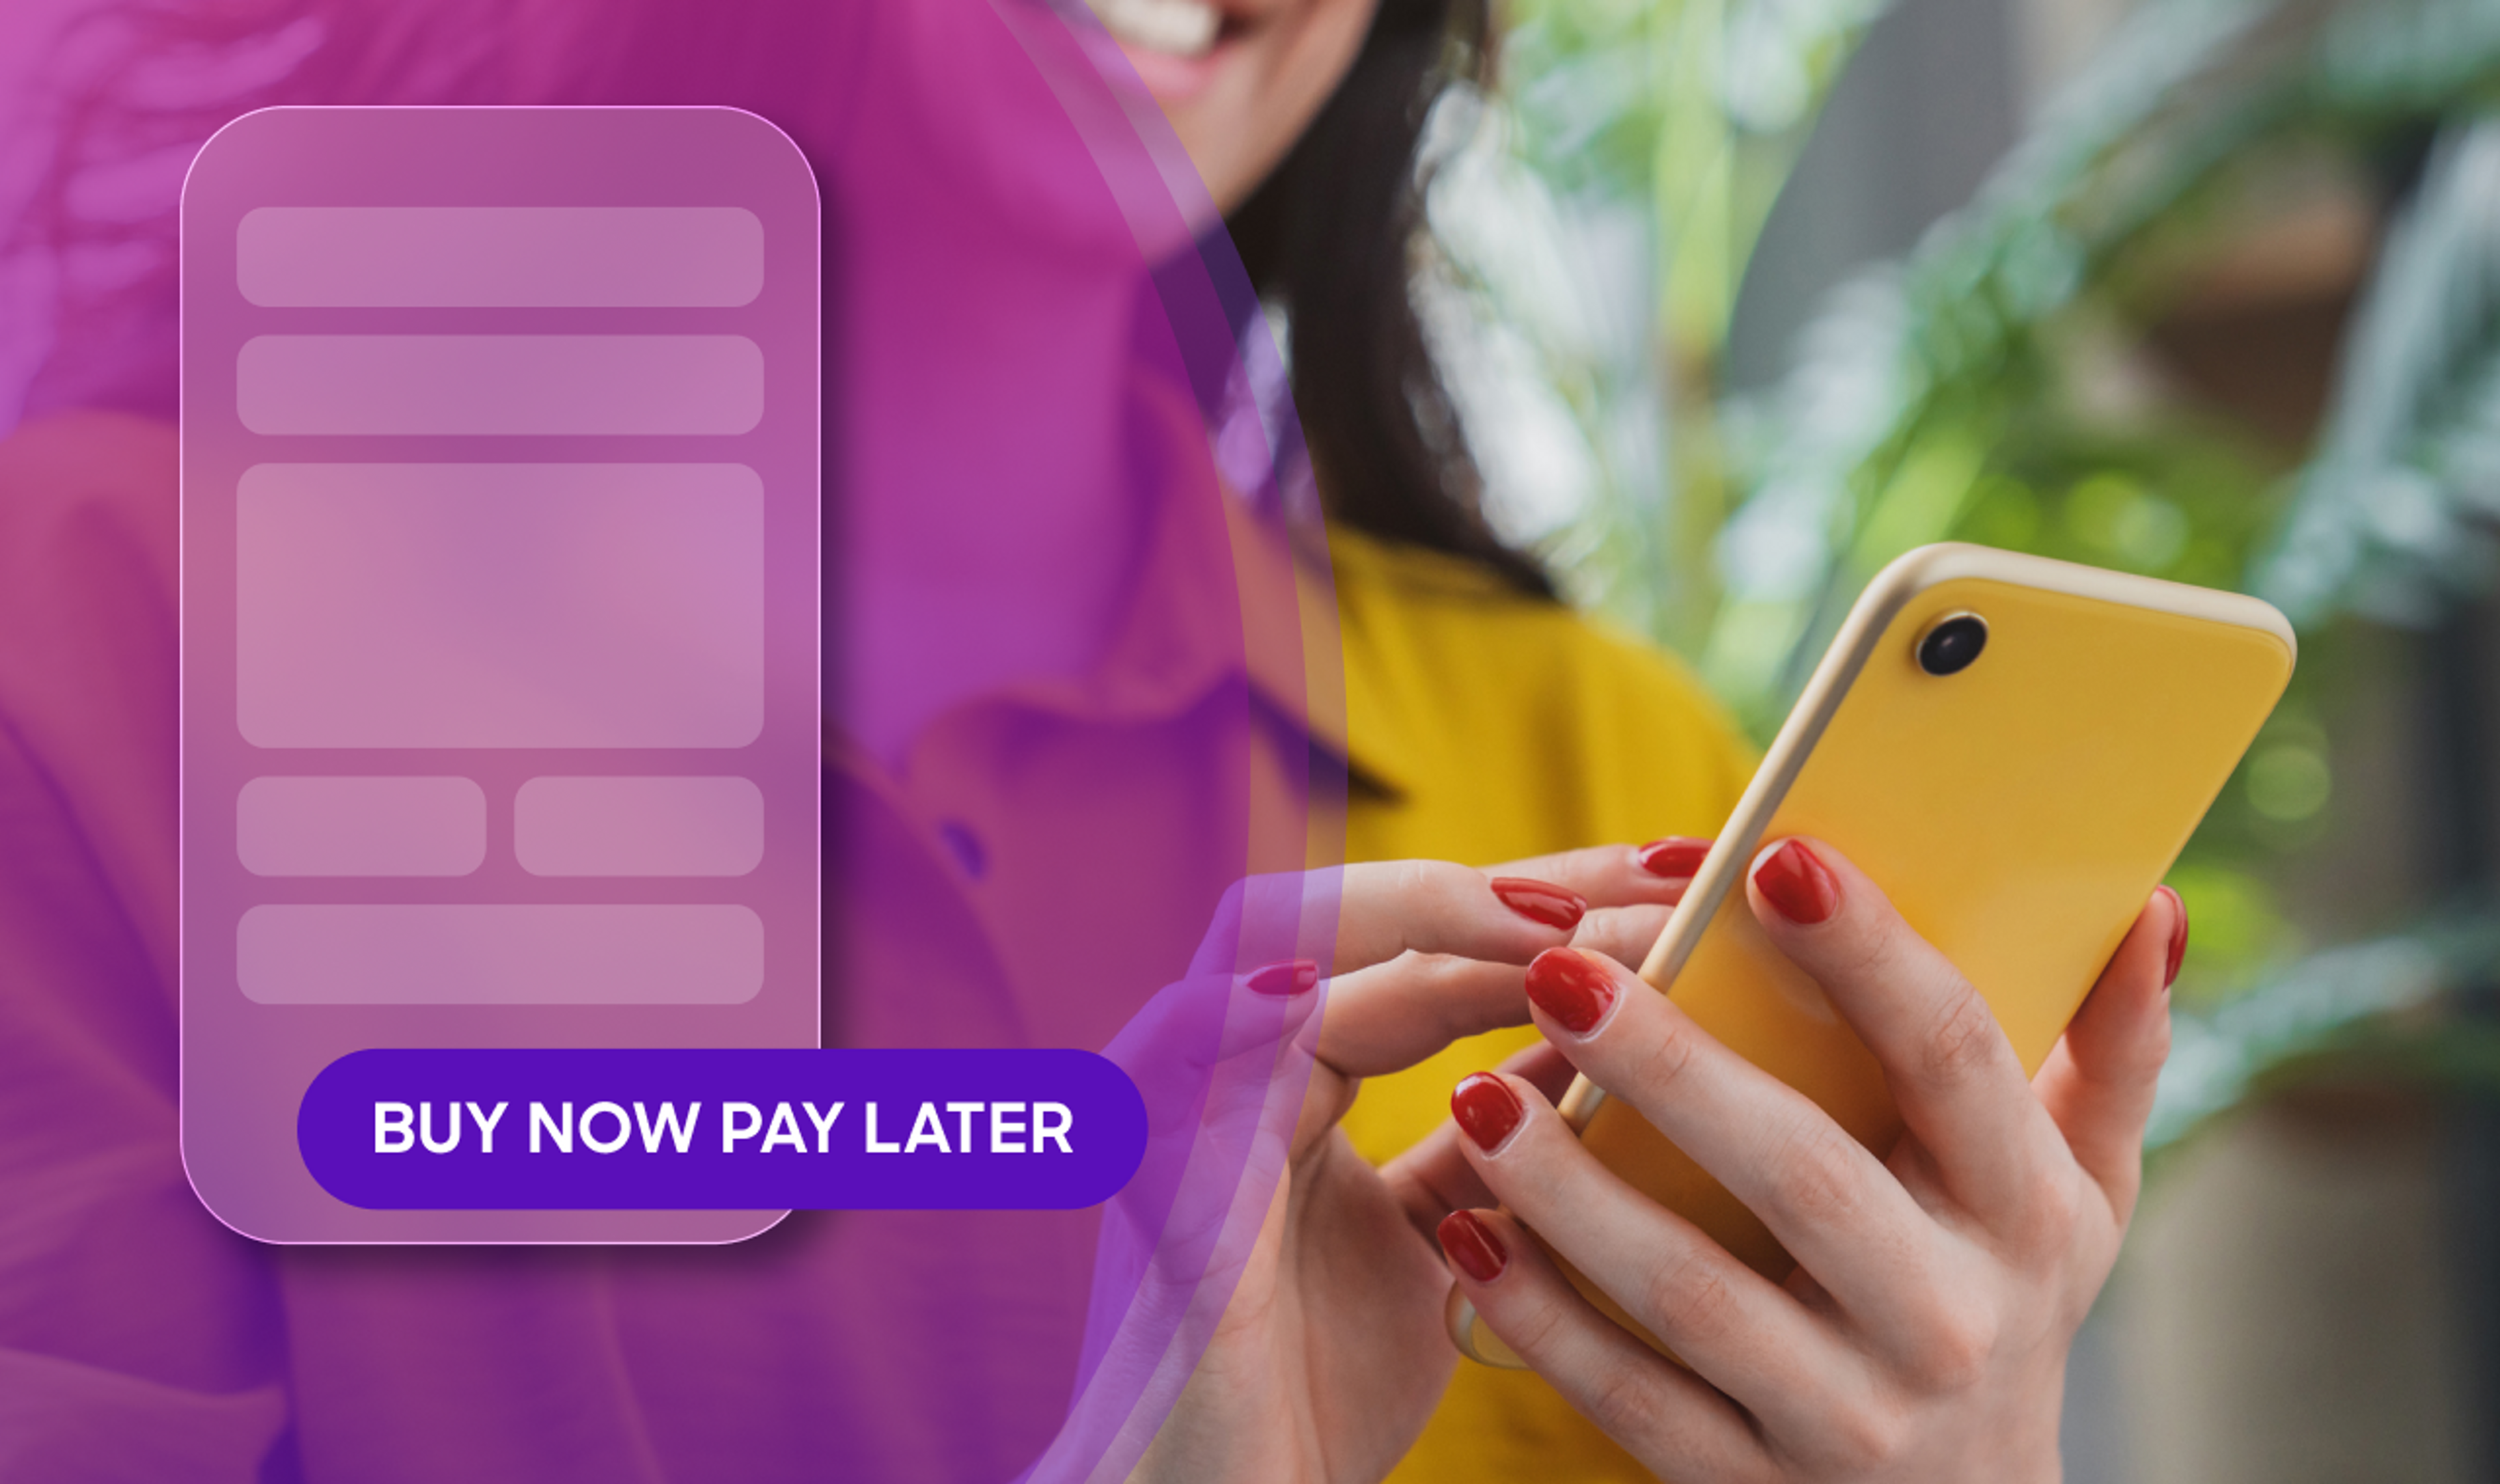 Promotional image showcasing 'Buy Now Pay Later' option, allowing customers to make purchases without immediate payment.